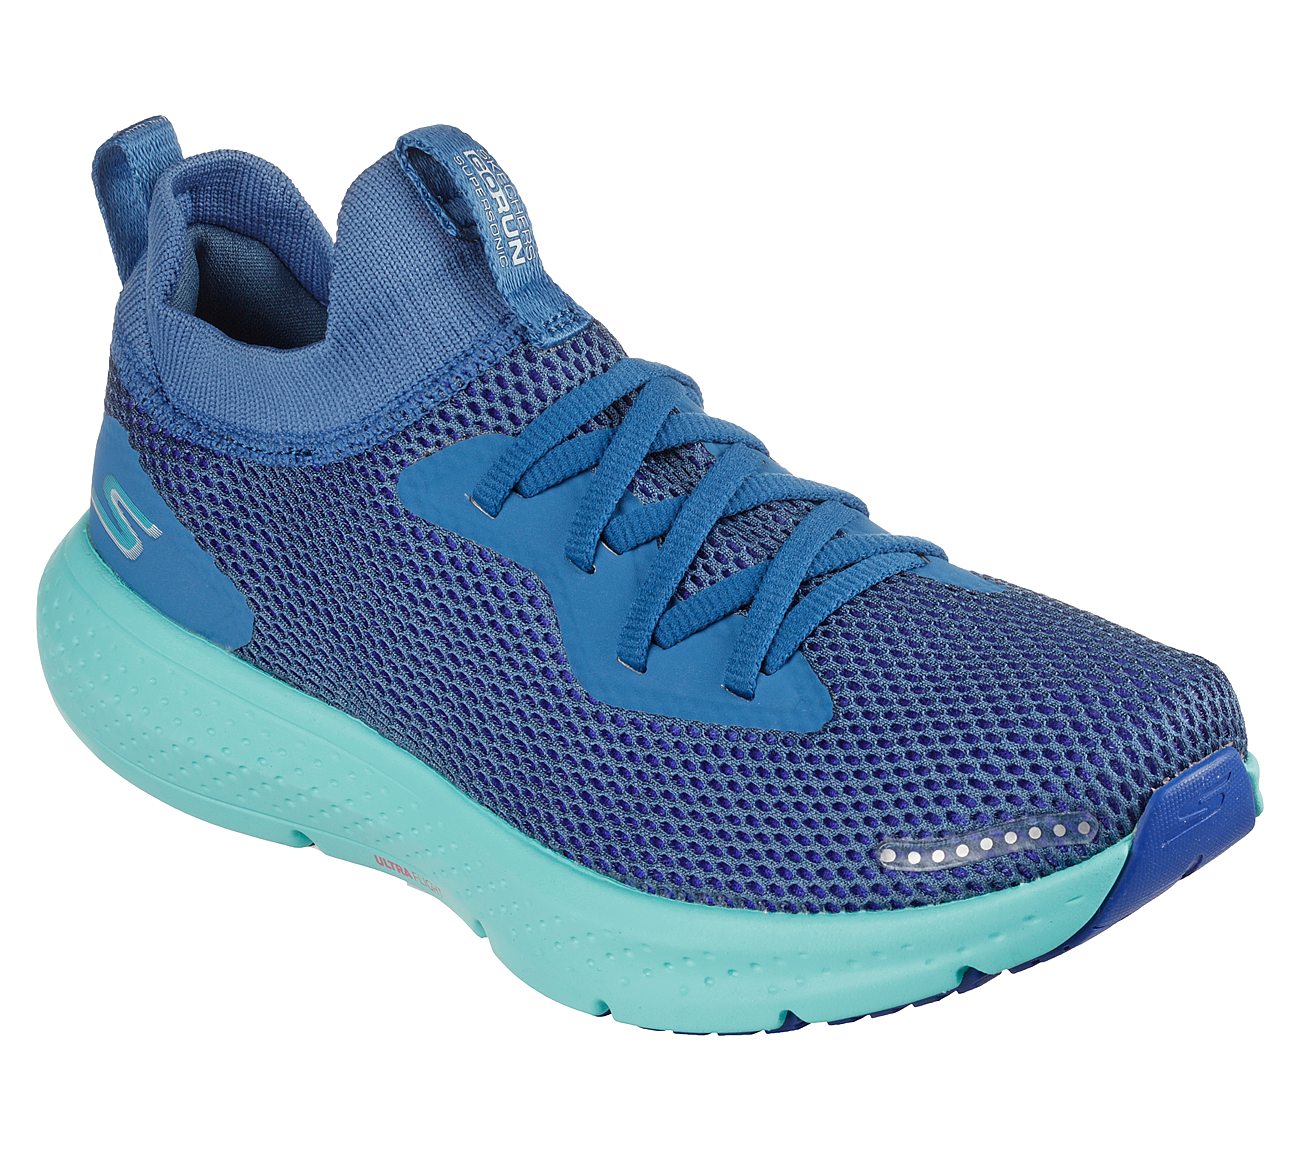 GO RUN SUPERSONIC - APEX, BLUE Footwear Right View